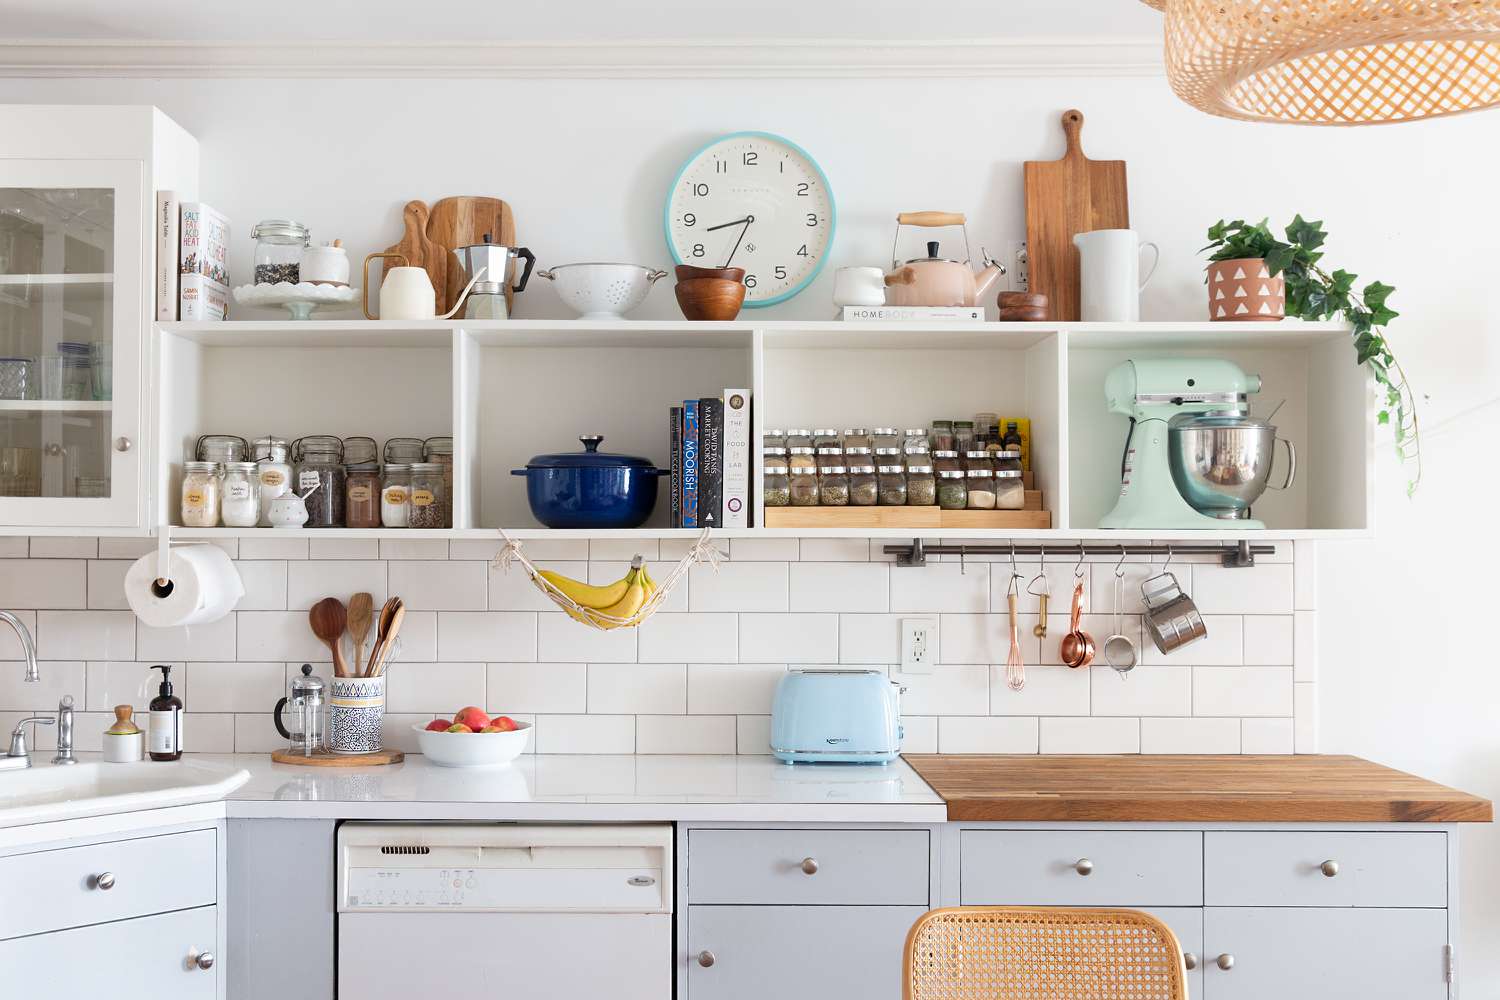 10 Clever Ways to Organize Your Kitchen Cabinets